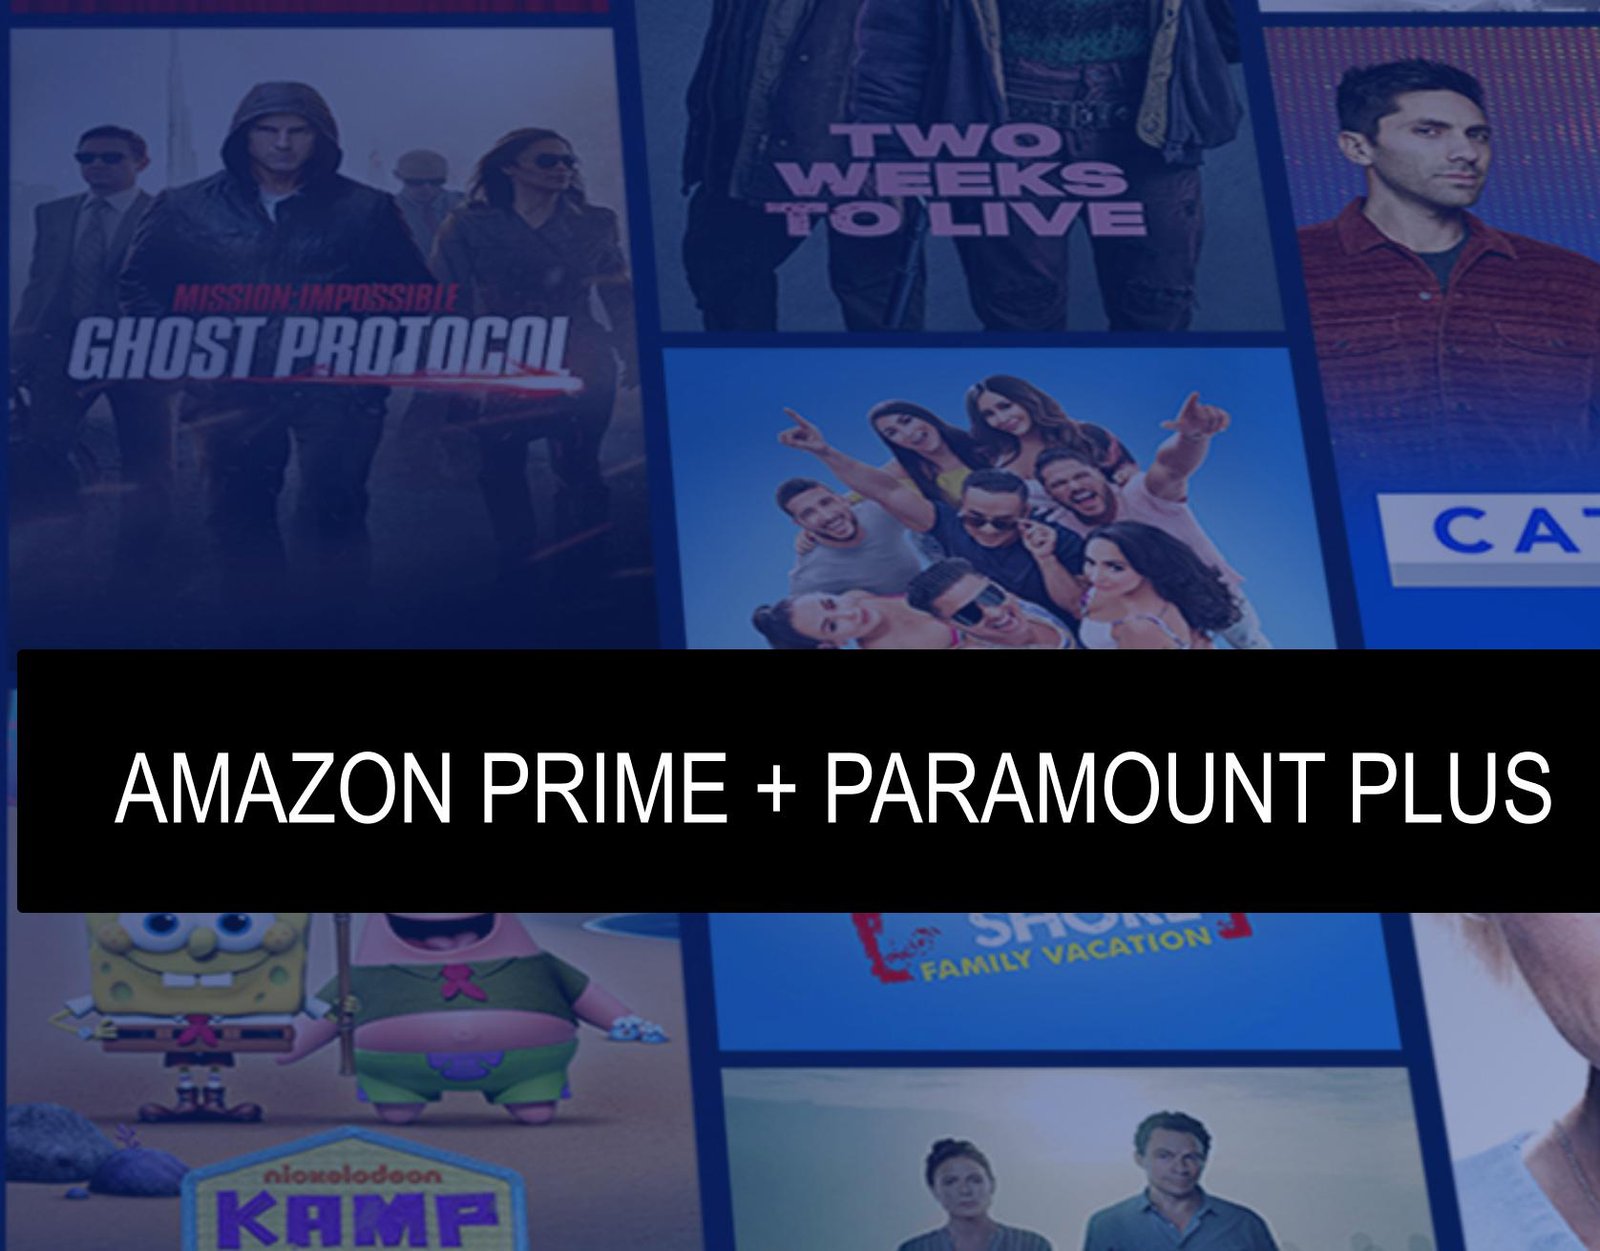 How much is Paramount Plus on Amazon Prime